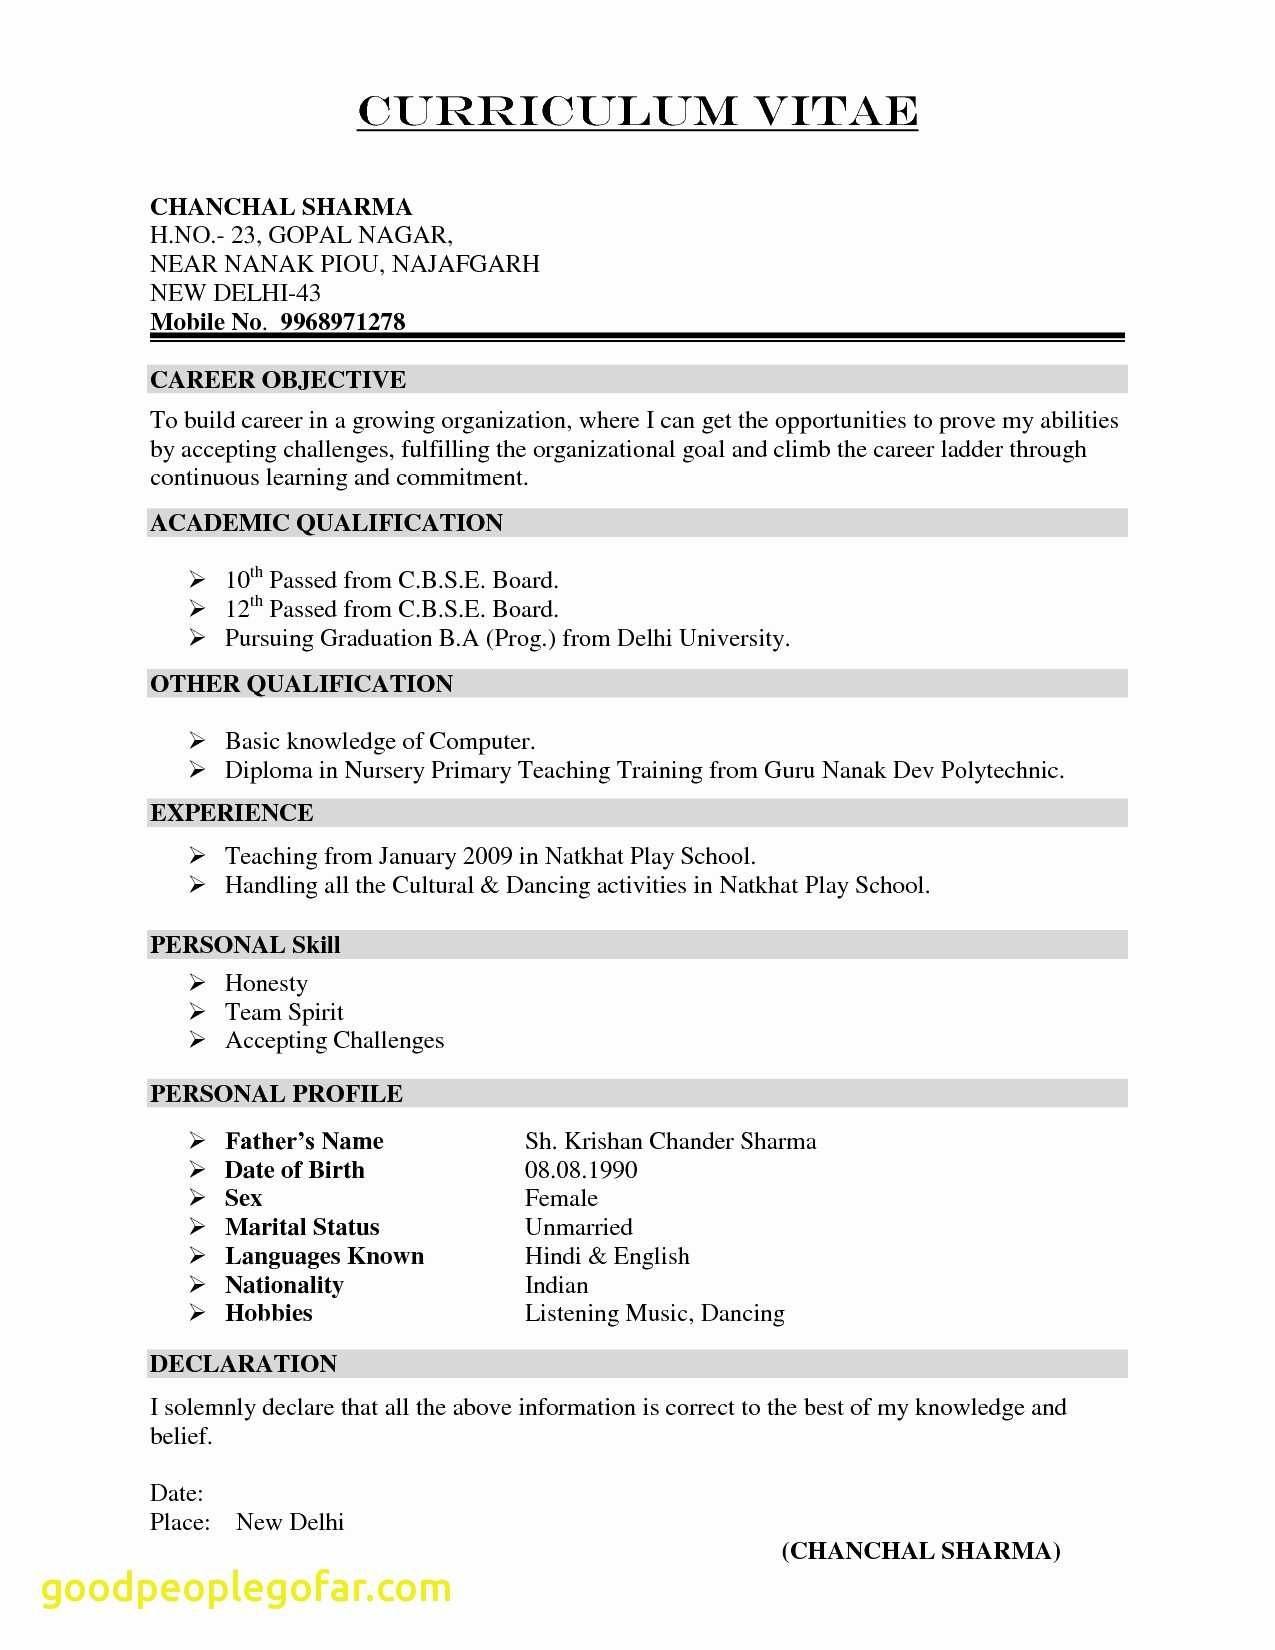 Free Template for A Cover Letter for A Resume - Fill In Resume Best Resume Fill In the Blanks Free Template